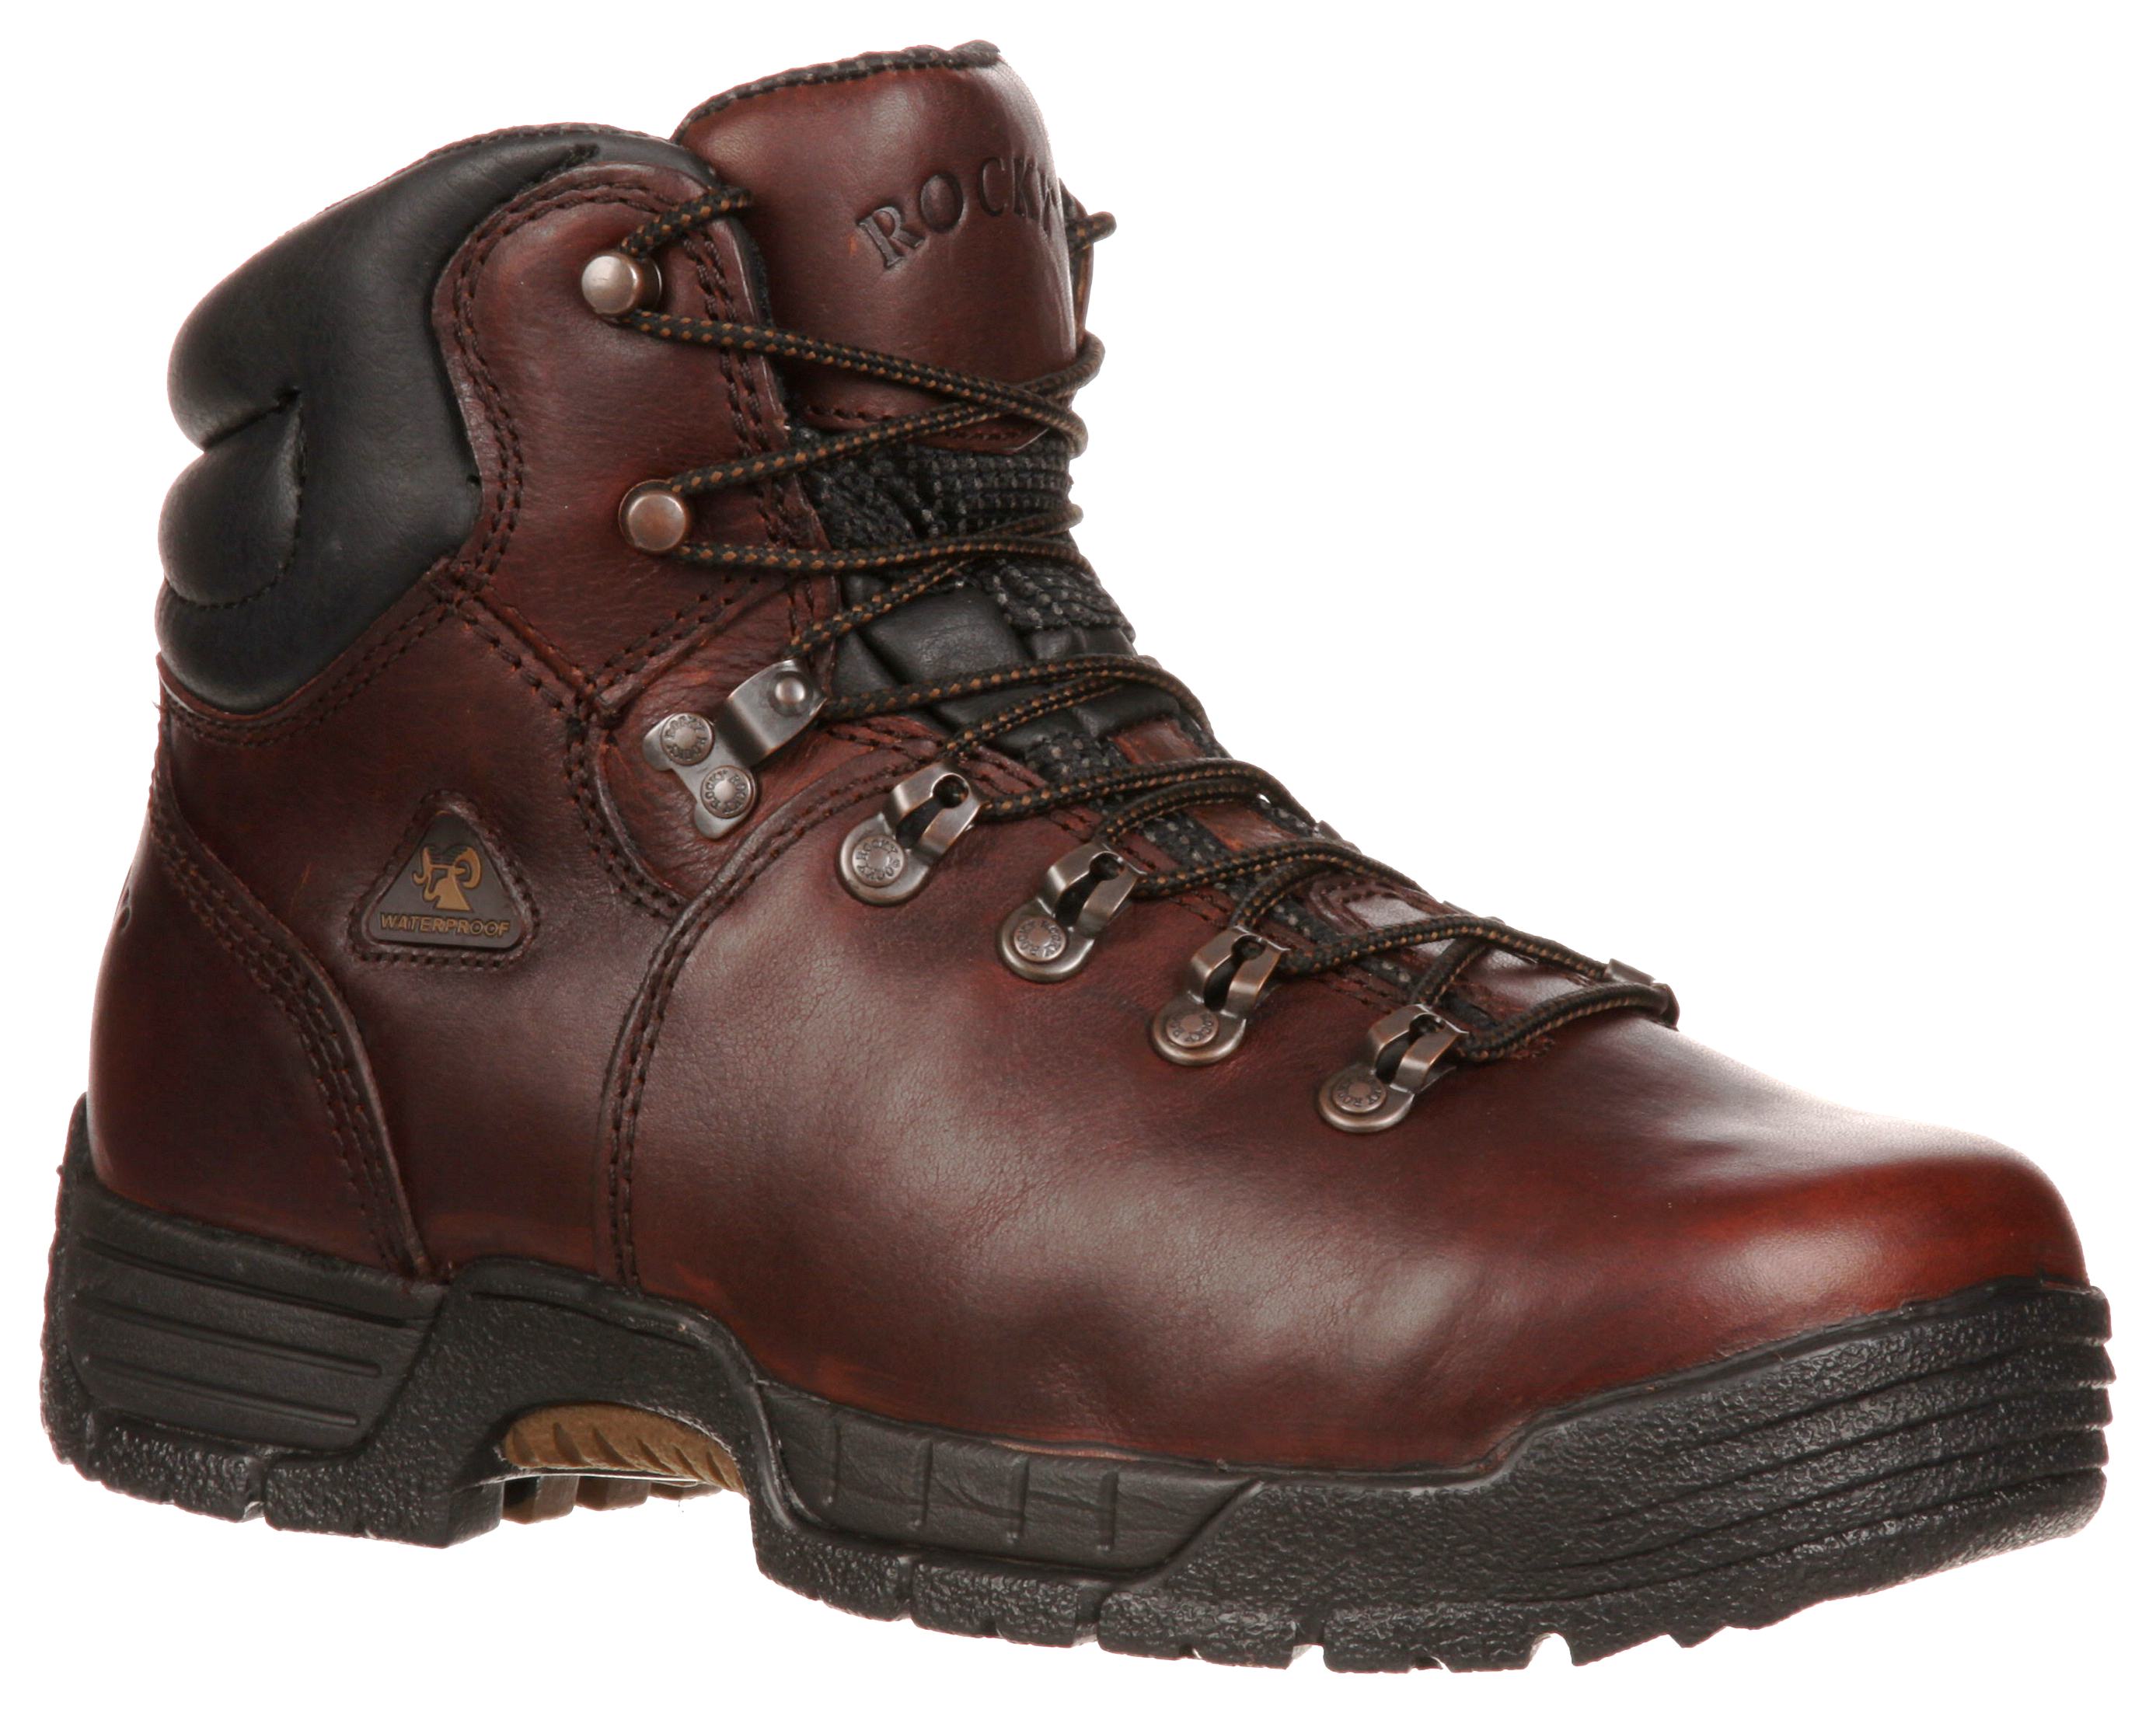 ROCKY MobiLite Waterproof Work Boots for Men - Brown - 11.5 W